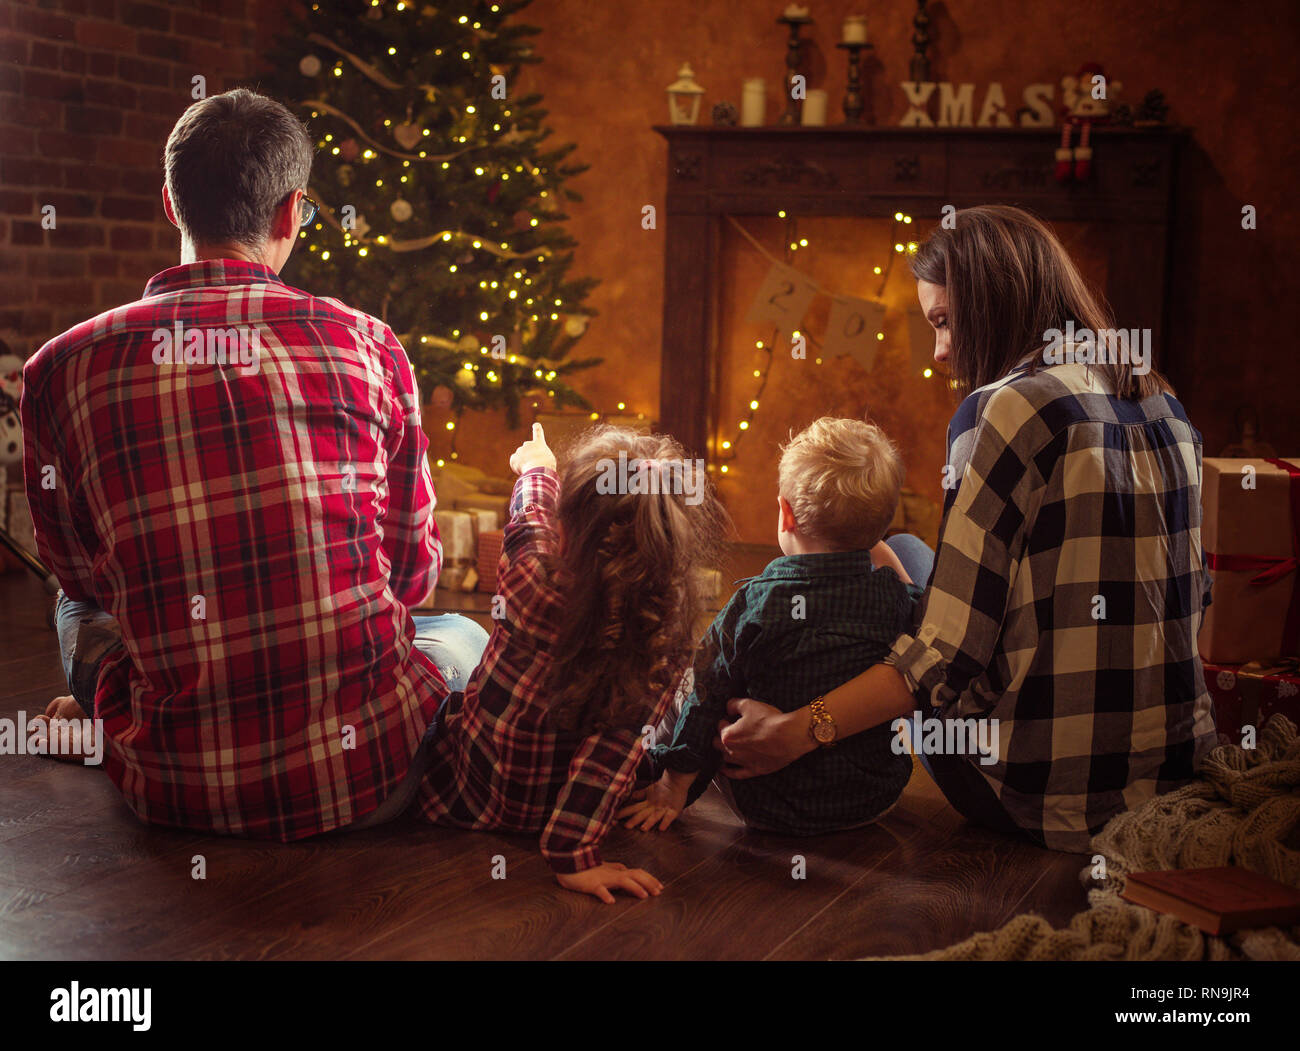 Portrait of a cheerful family realxing in a winter, calm evening Stock Photo